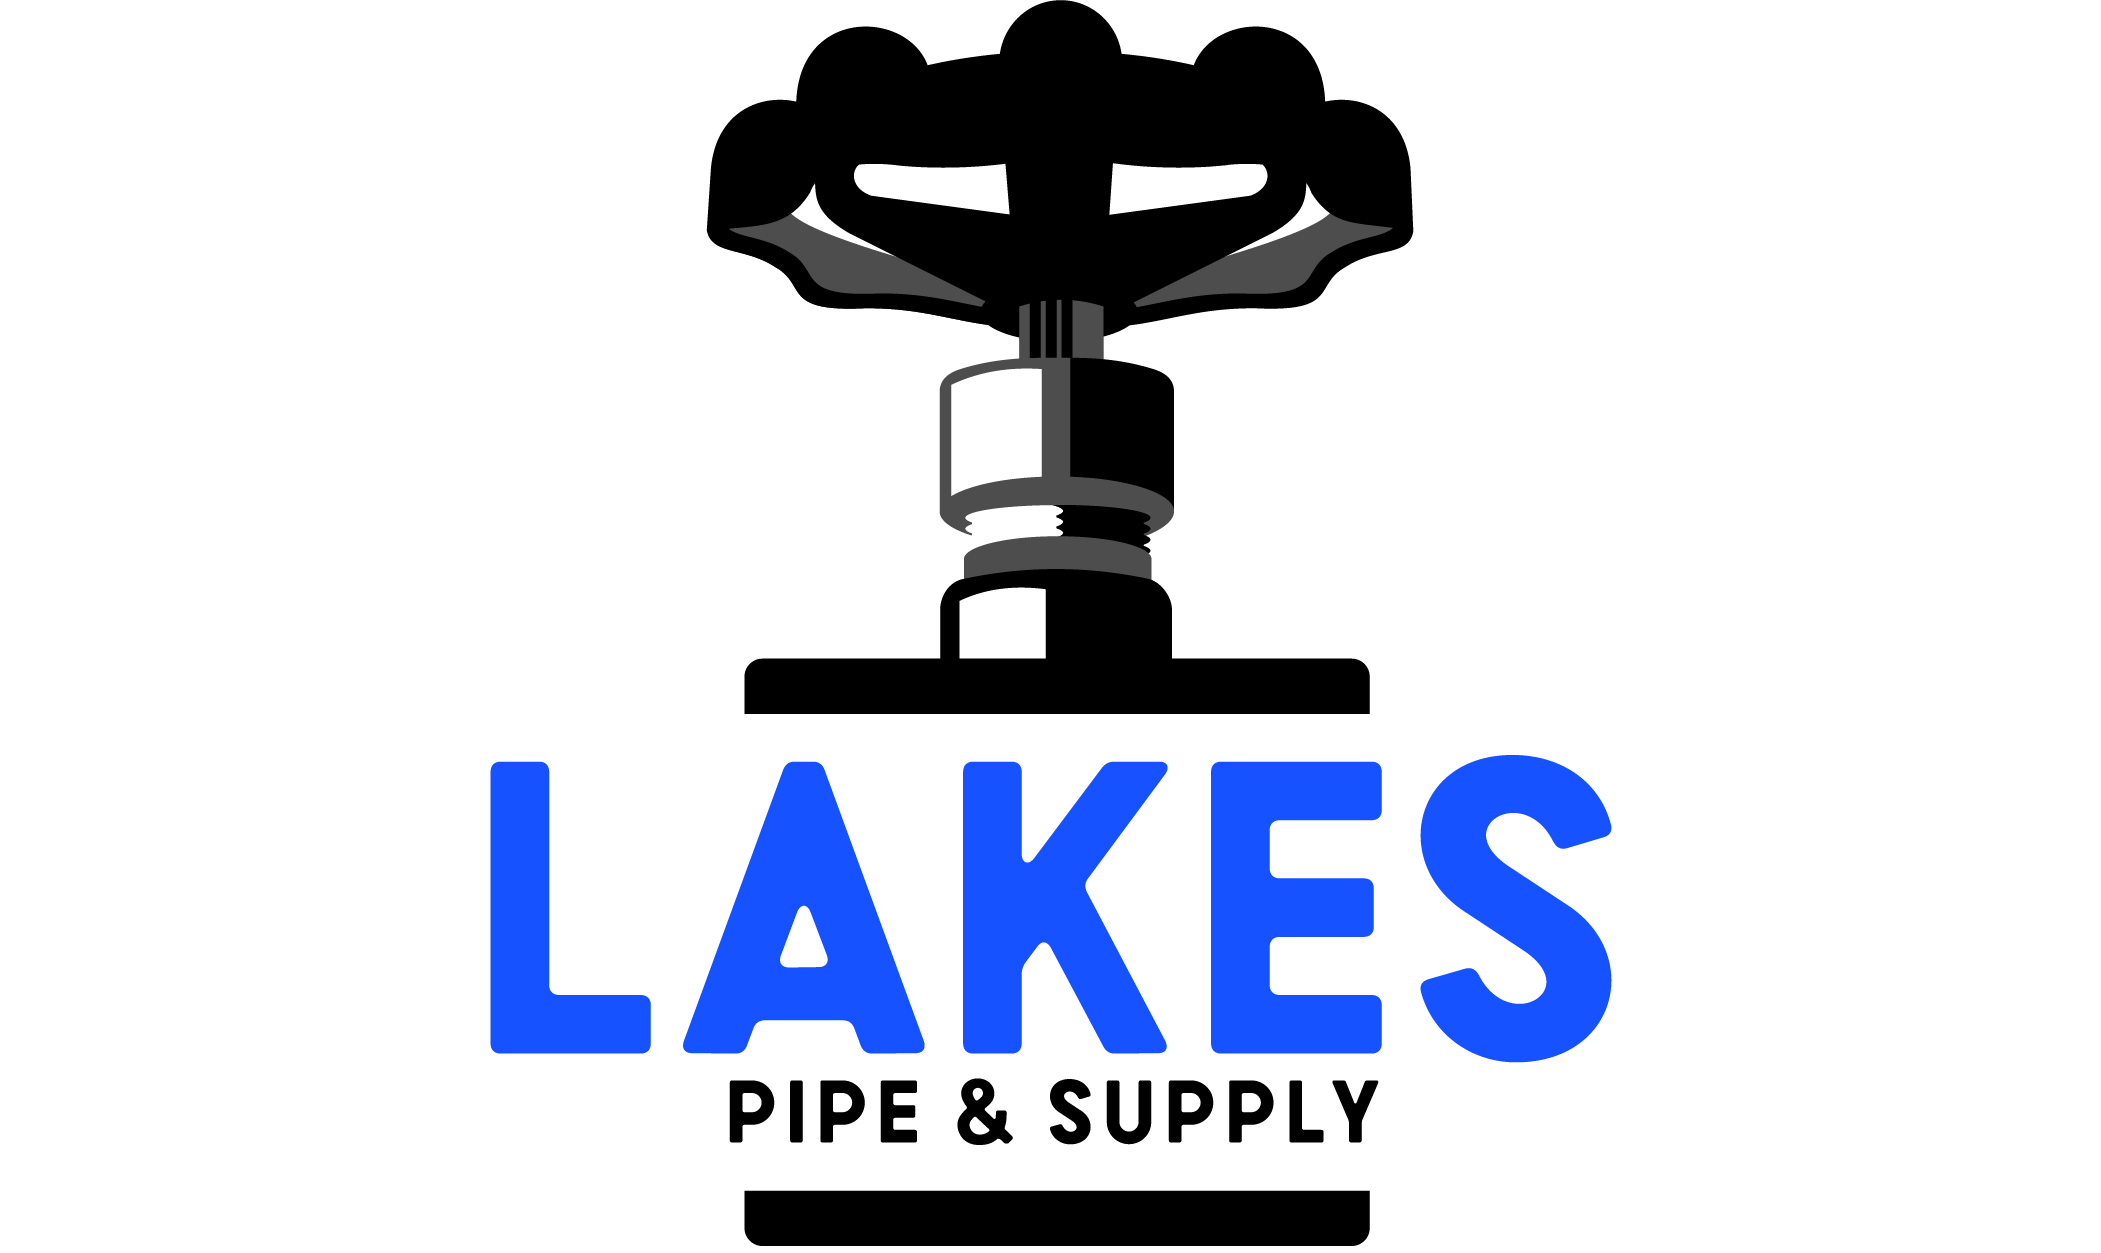 Lakes Pipe & Supply